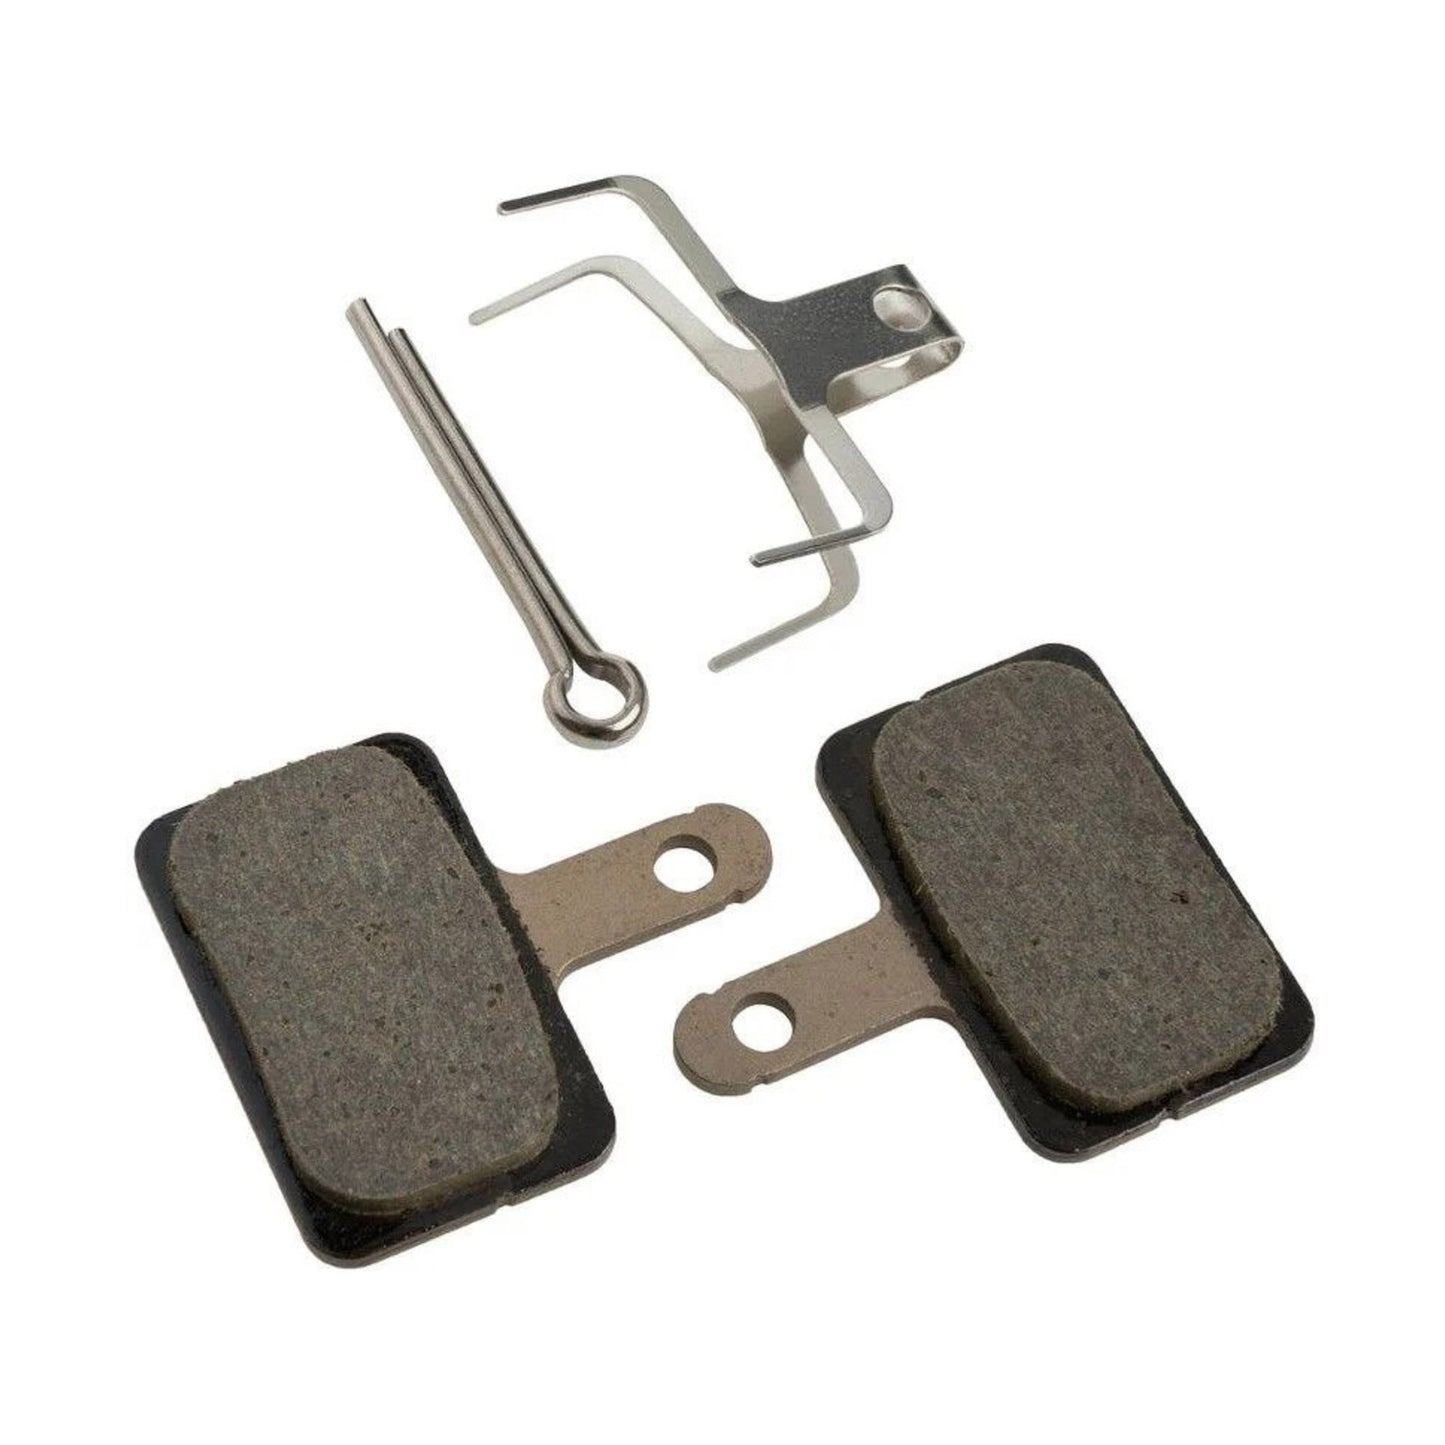 Shimano BR-MT400 B01S Resin Disc Brake Pads (Pair) suit wide variety of Shimano disc brakes